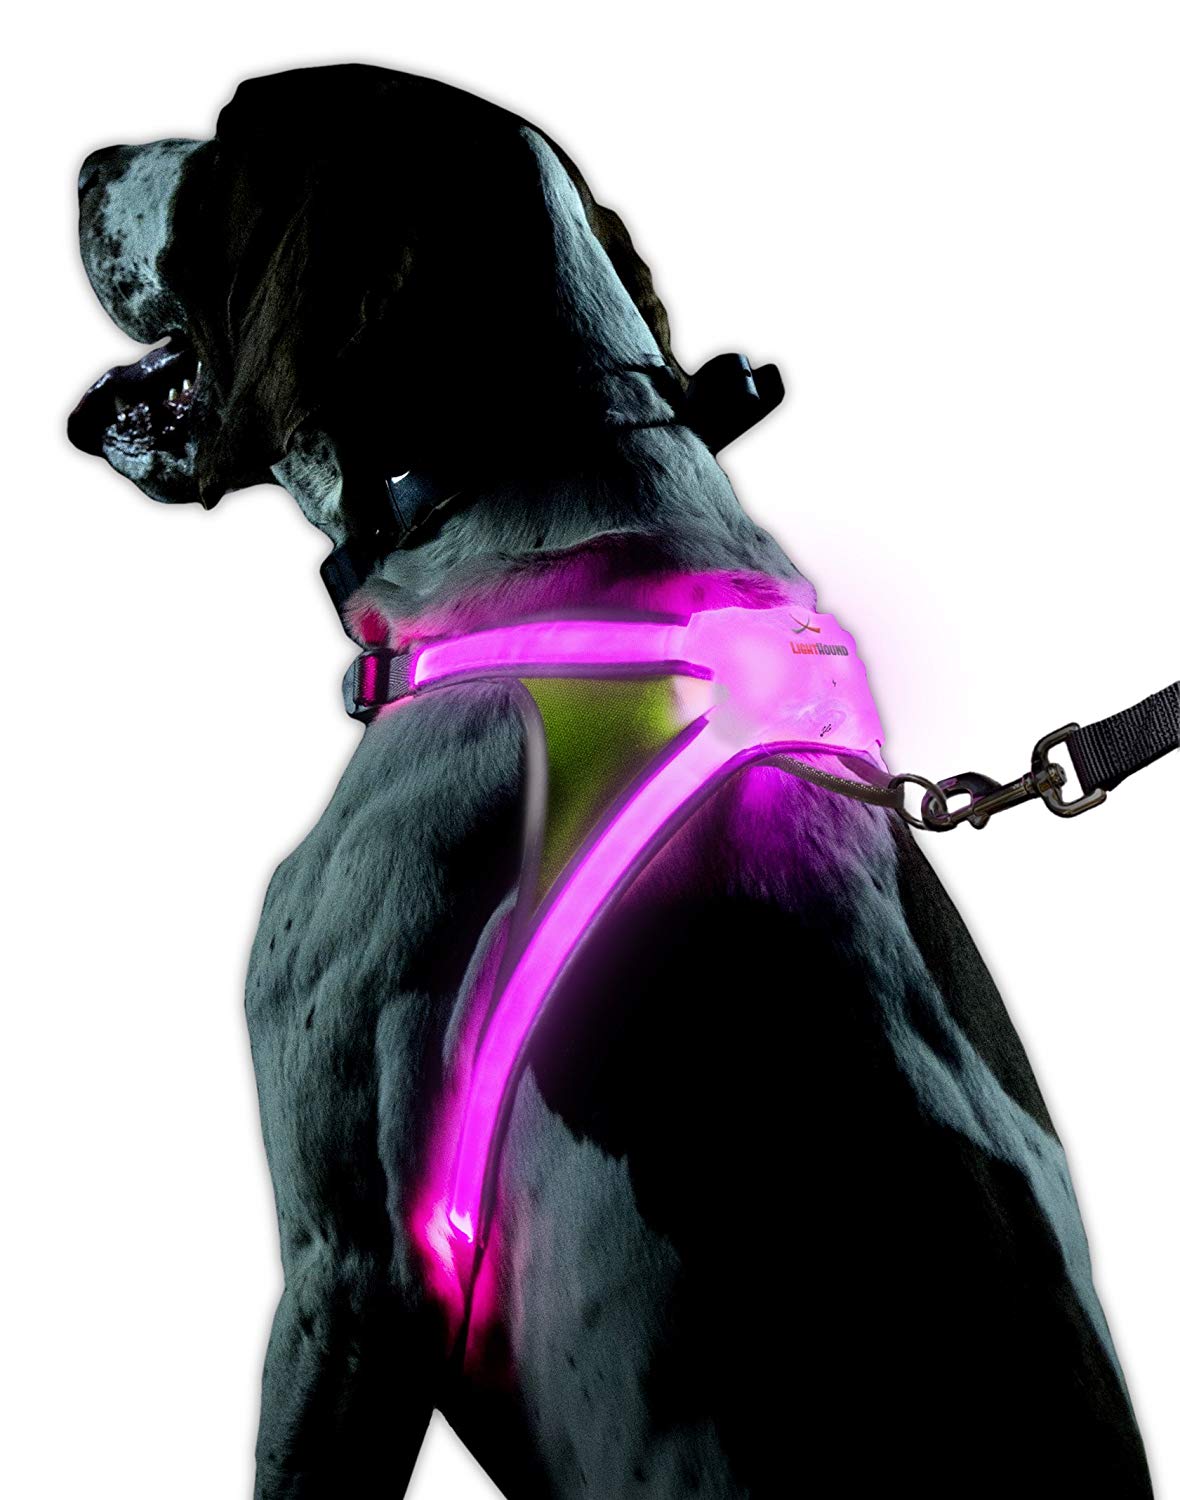 noxgear LightHound – Revolutionary Illuminated and Reflective Harness for Dogs Including Multicolored LED Fiber Optics (USB Rechargeable, Adjustable, 1